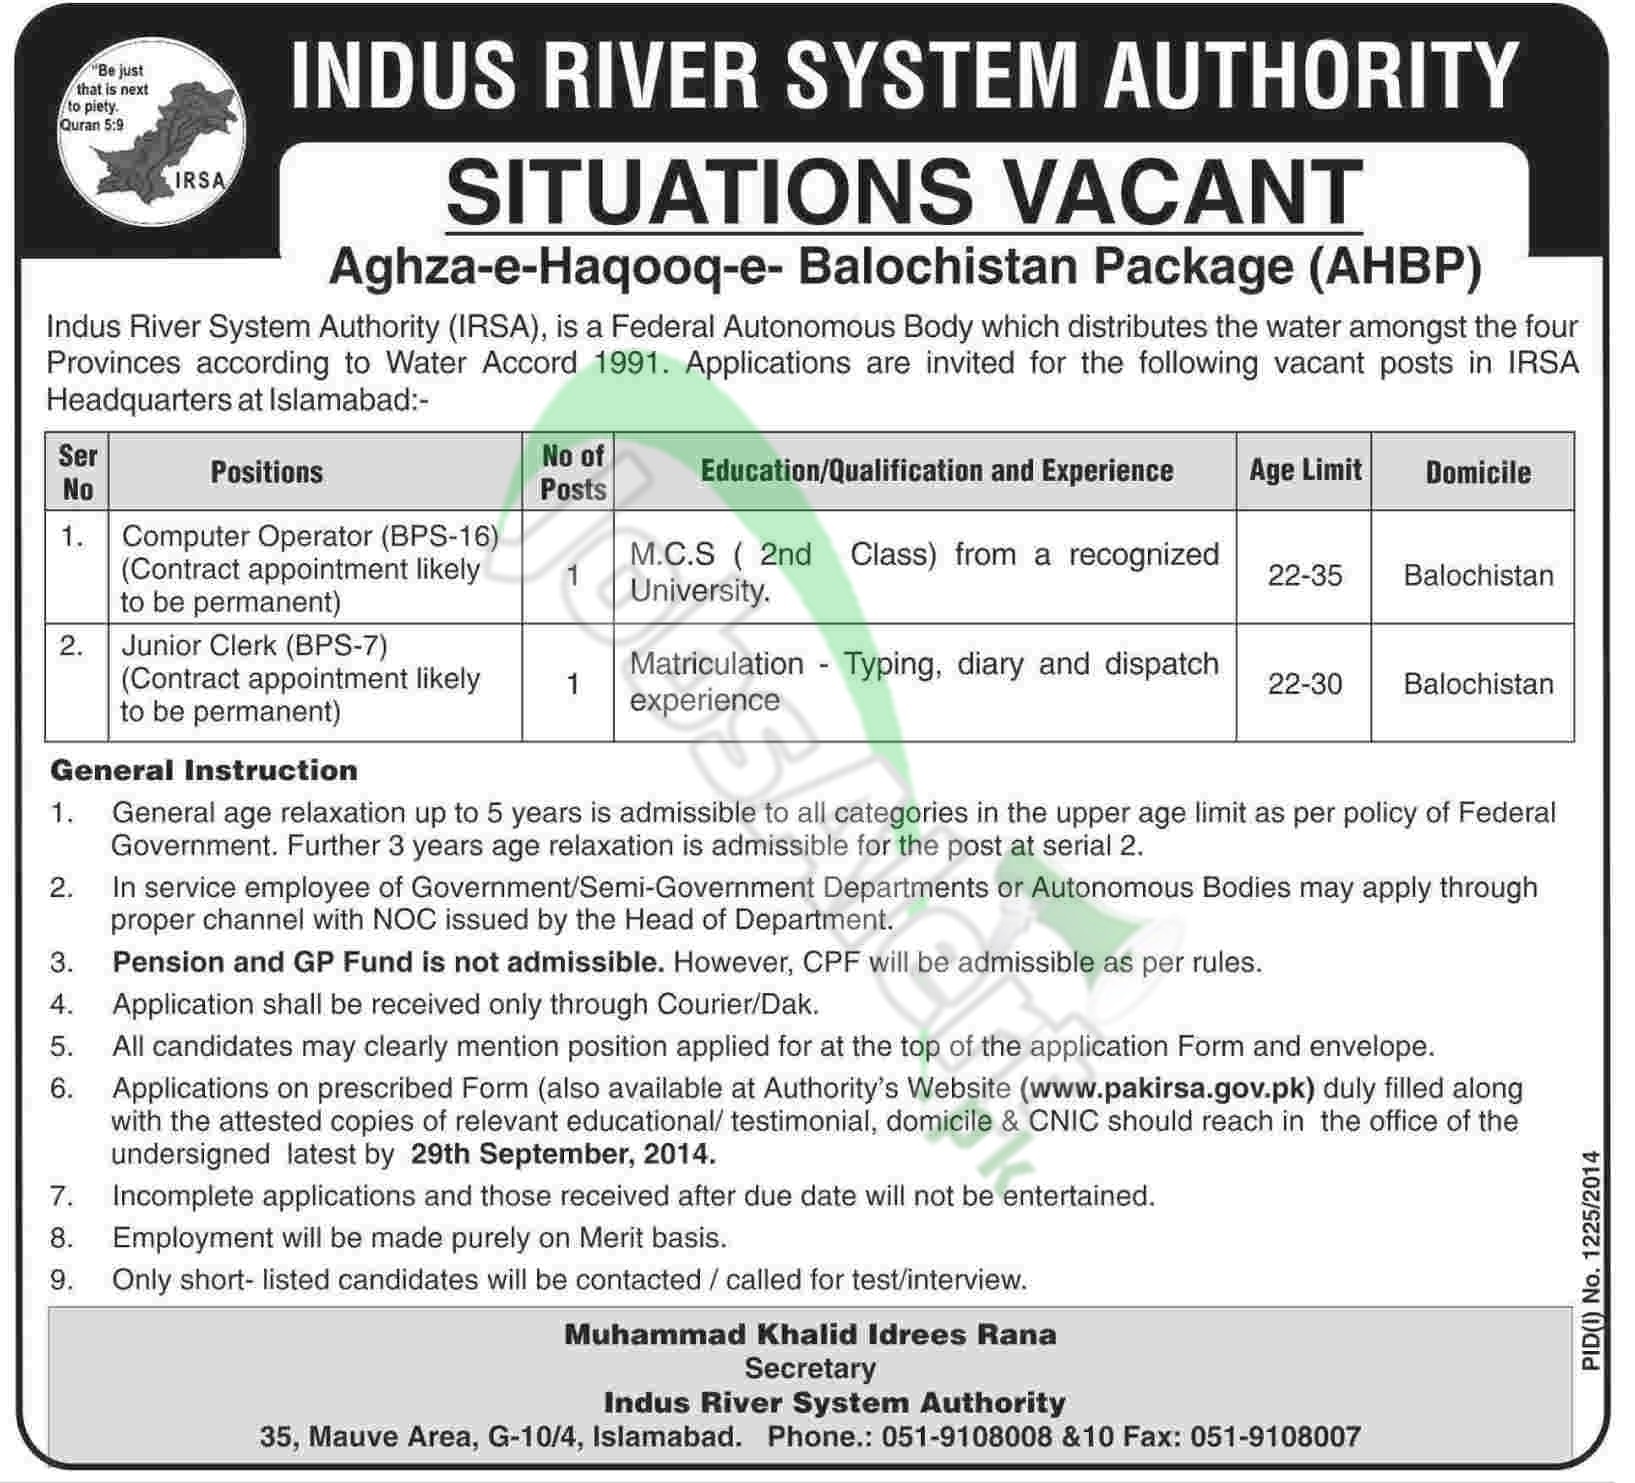 Indus River System Authority (IRSA)